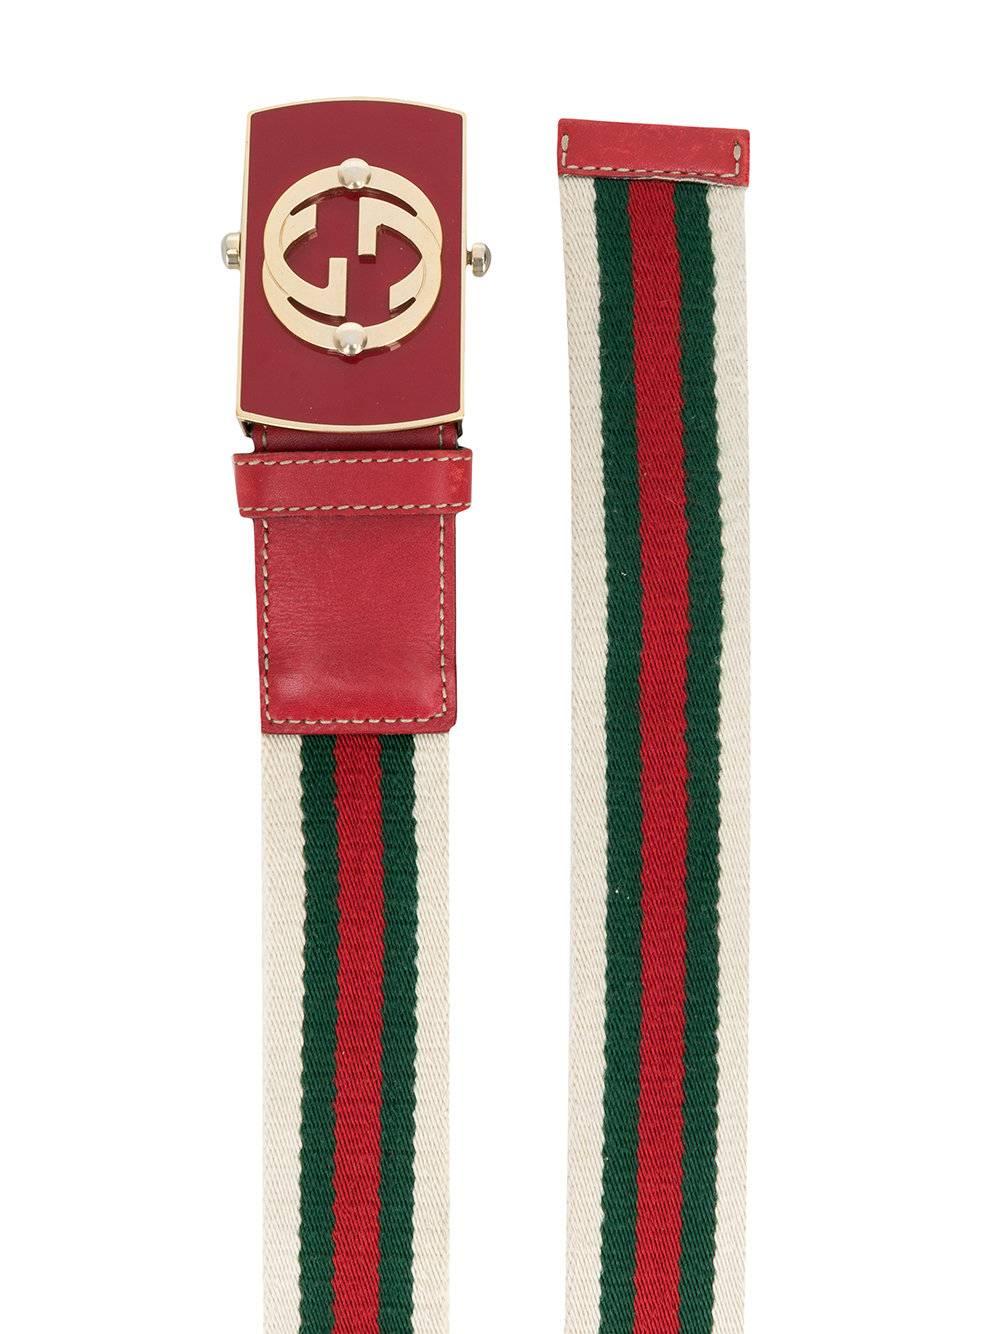 Ivory GG Web belt from Gucci Vintage featuring a clip fastening, a signature green and red Web detail and an enamelled logo buckle. 

Material: Polyester

One Size

Condition: Excellent, 9 out of 10